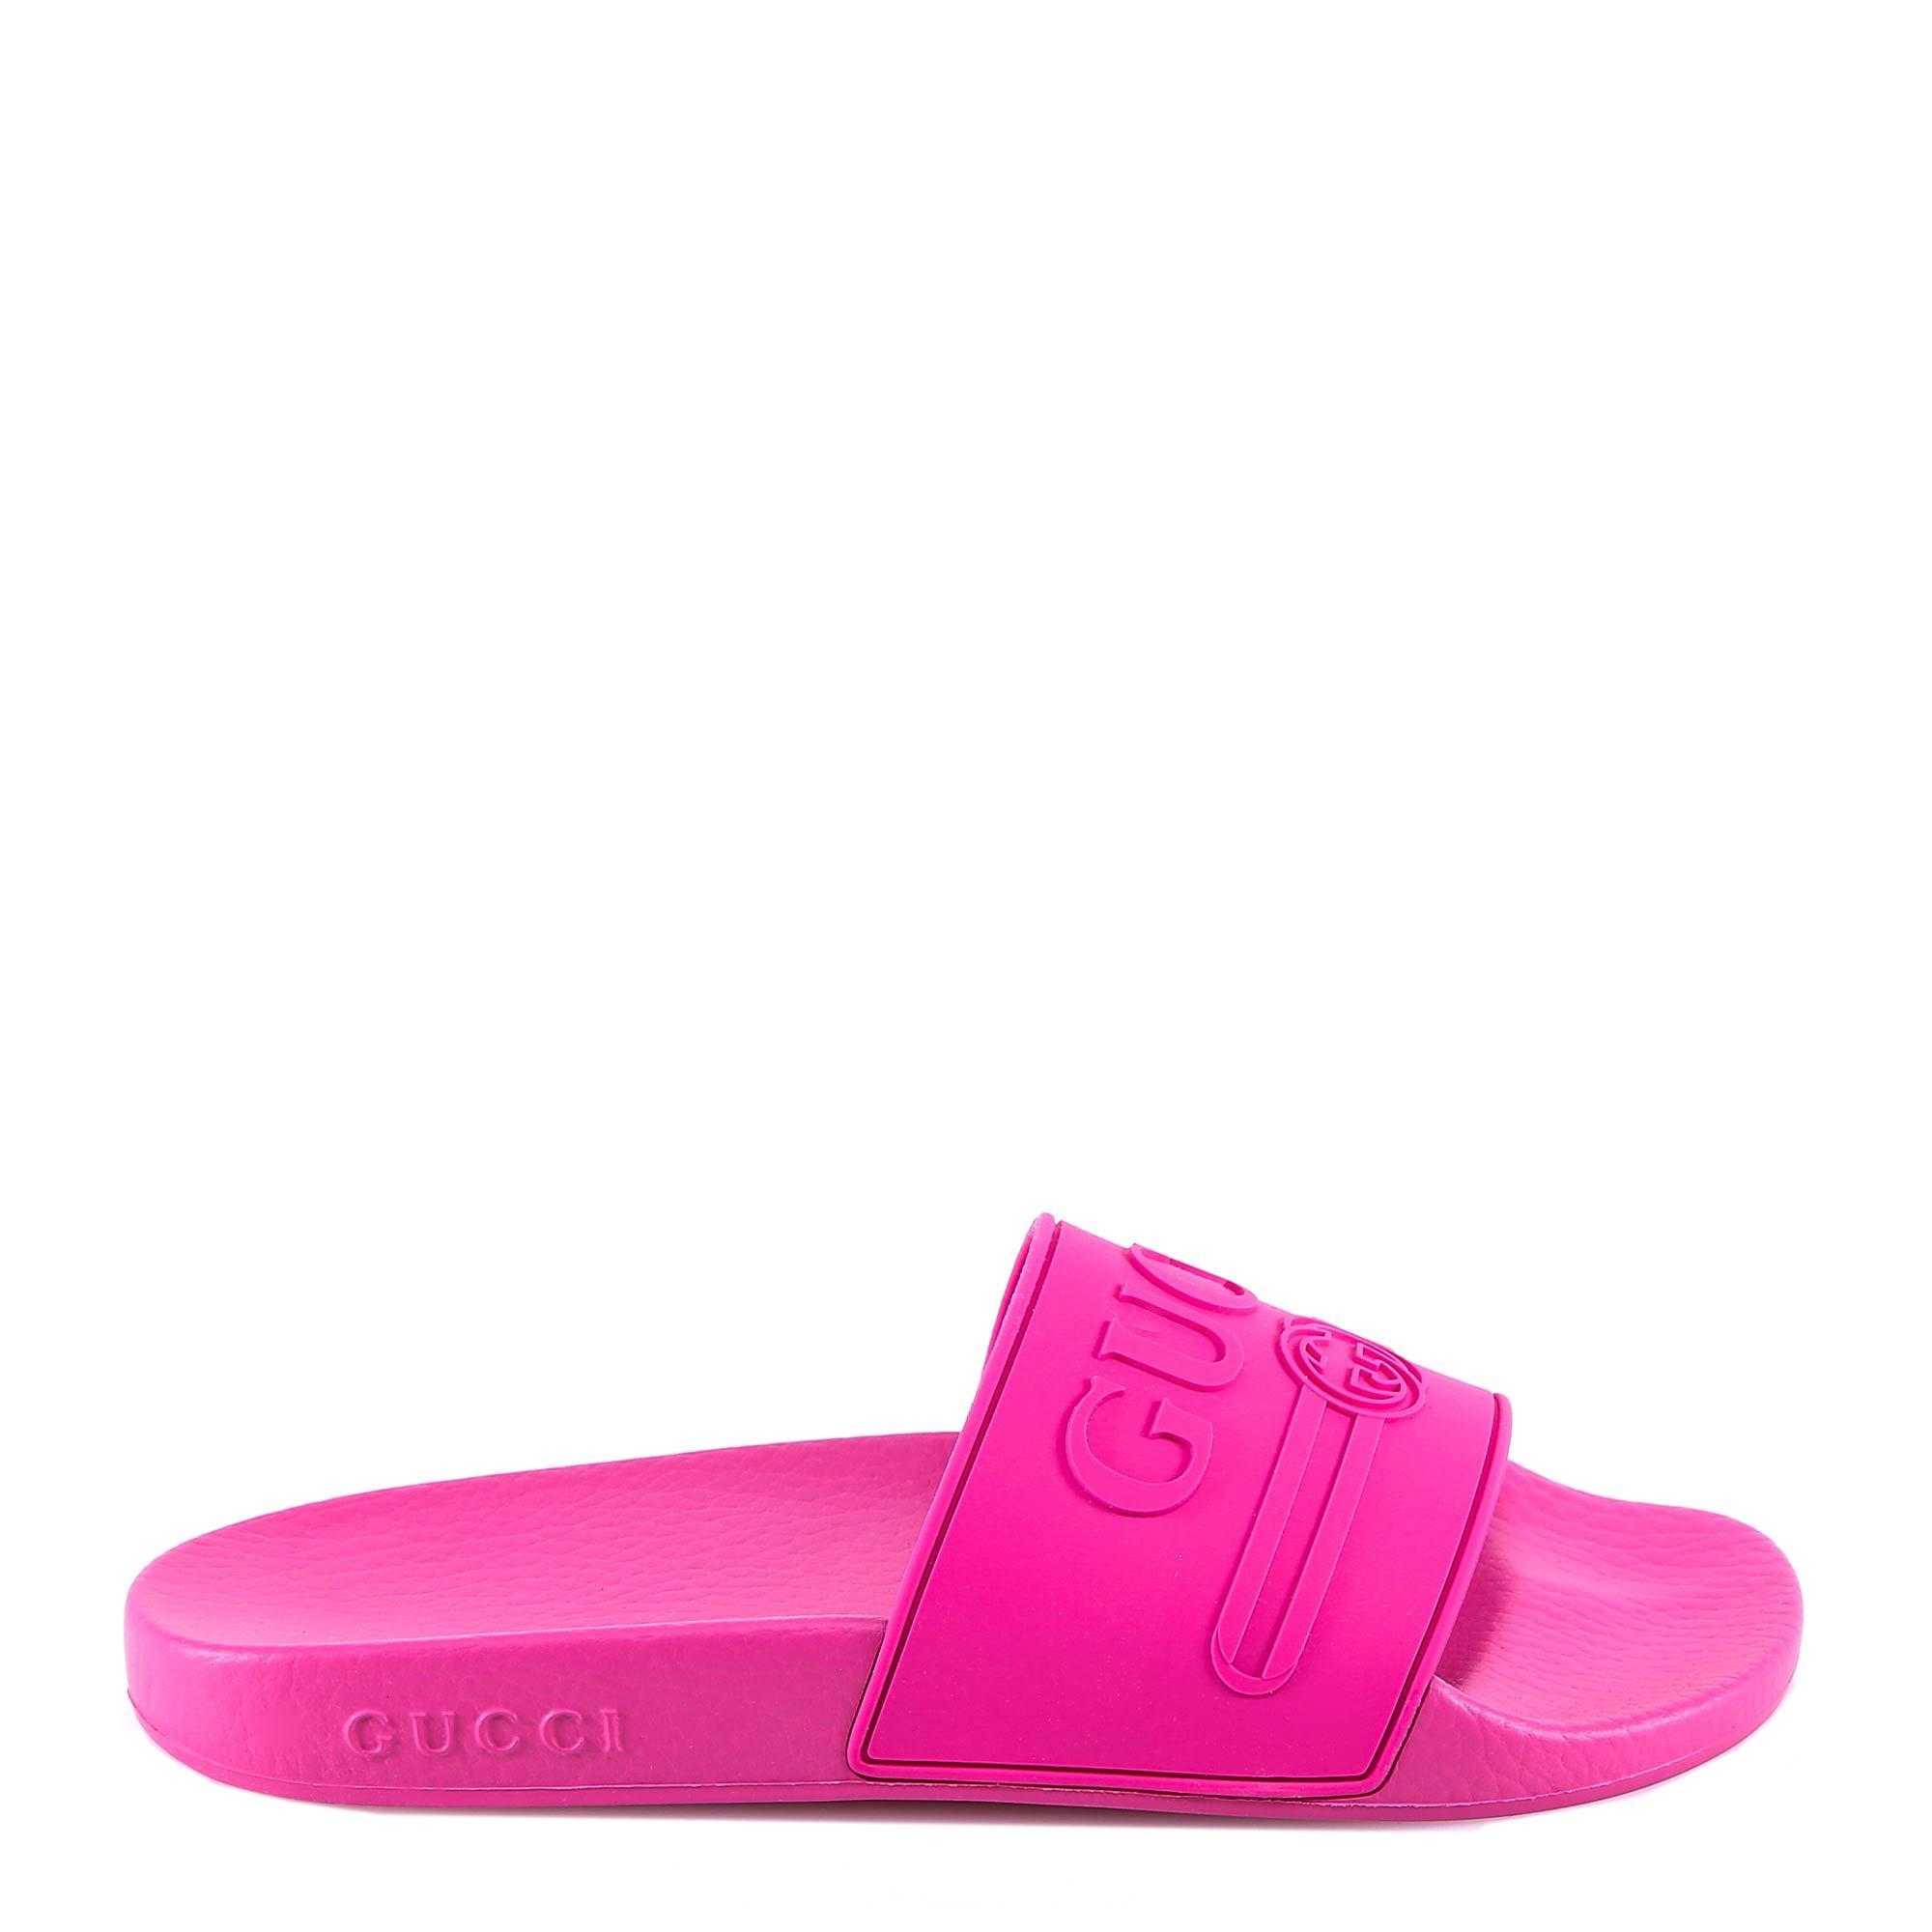 Gucci Rubber Embossed Logo Slides in Pink - Lyst